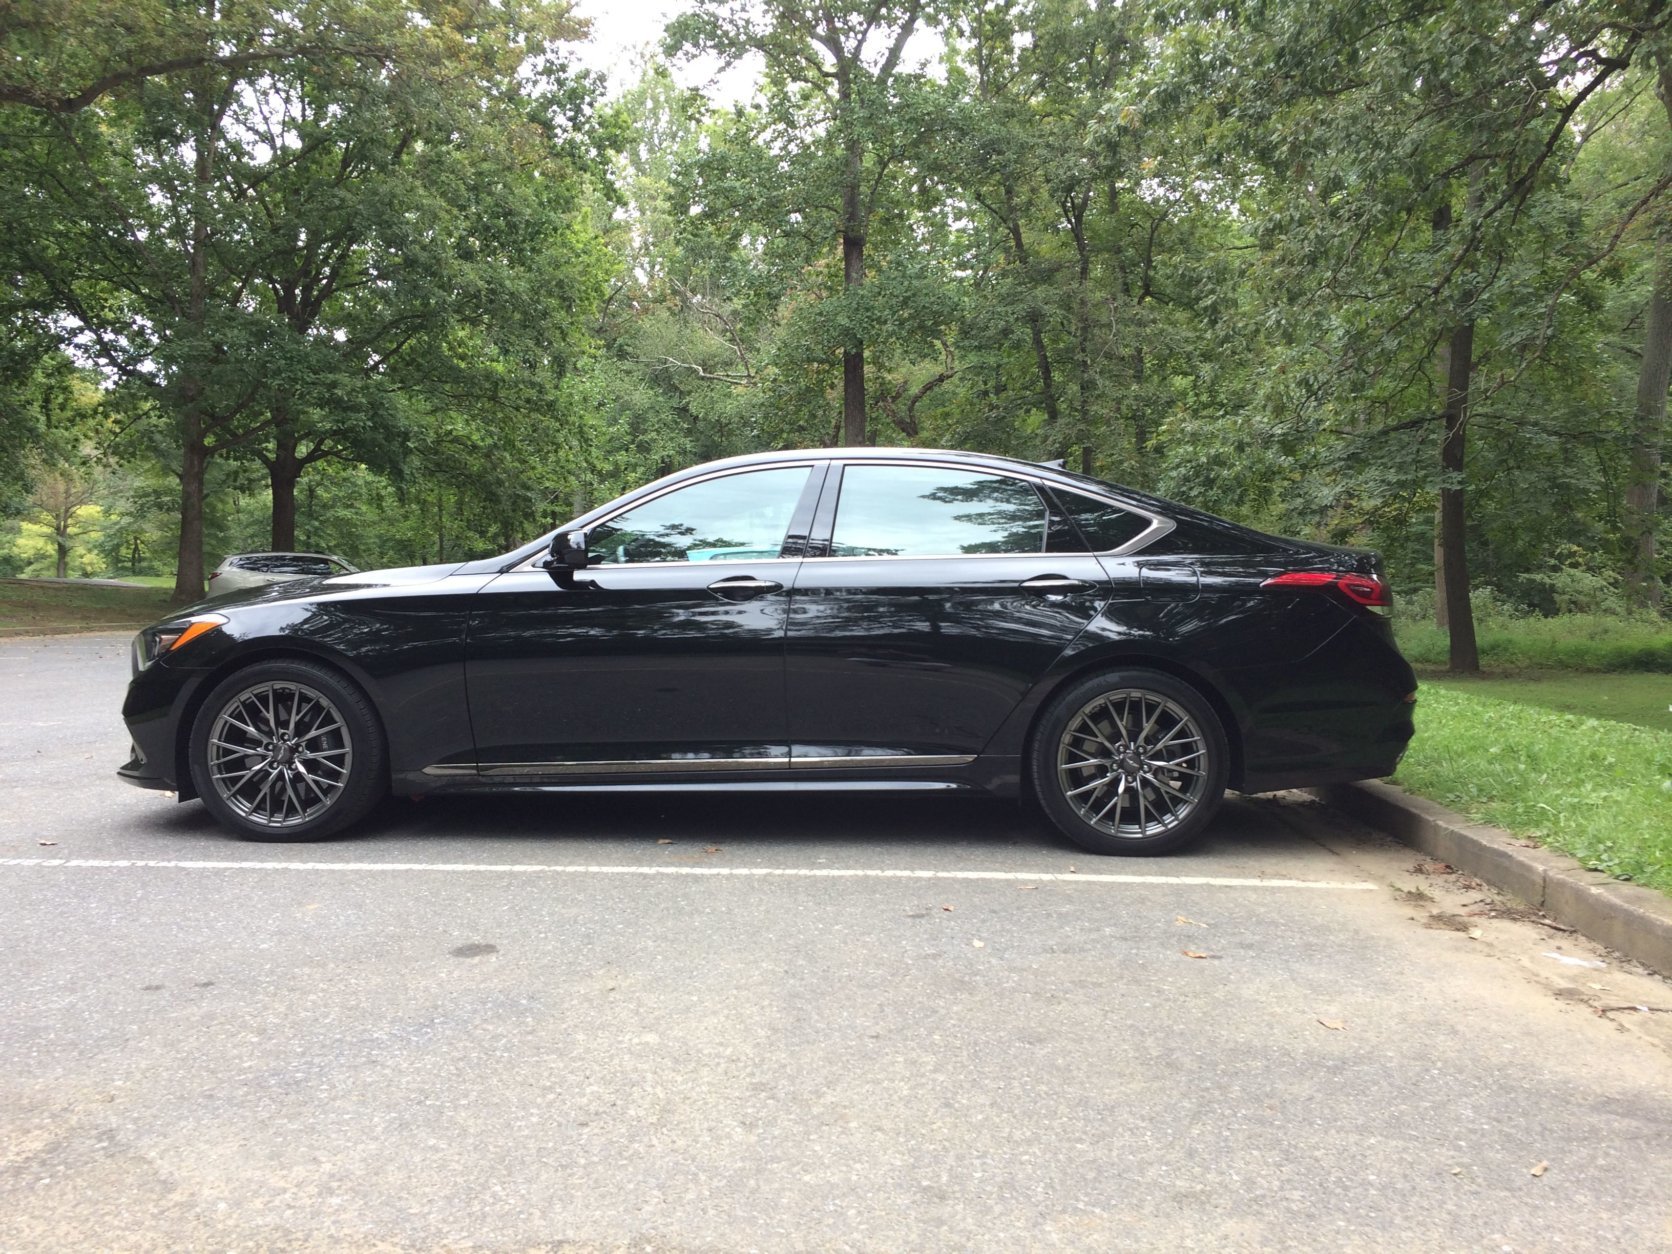 The G80 Sport is more aggressive than the non-sport model and comes with larger 19-inch wheels. (WTOP/Mike Parris)